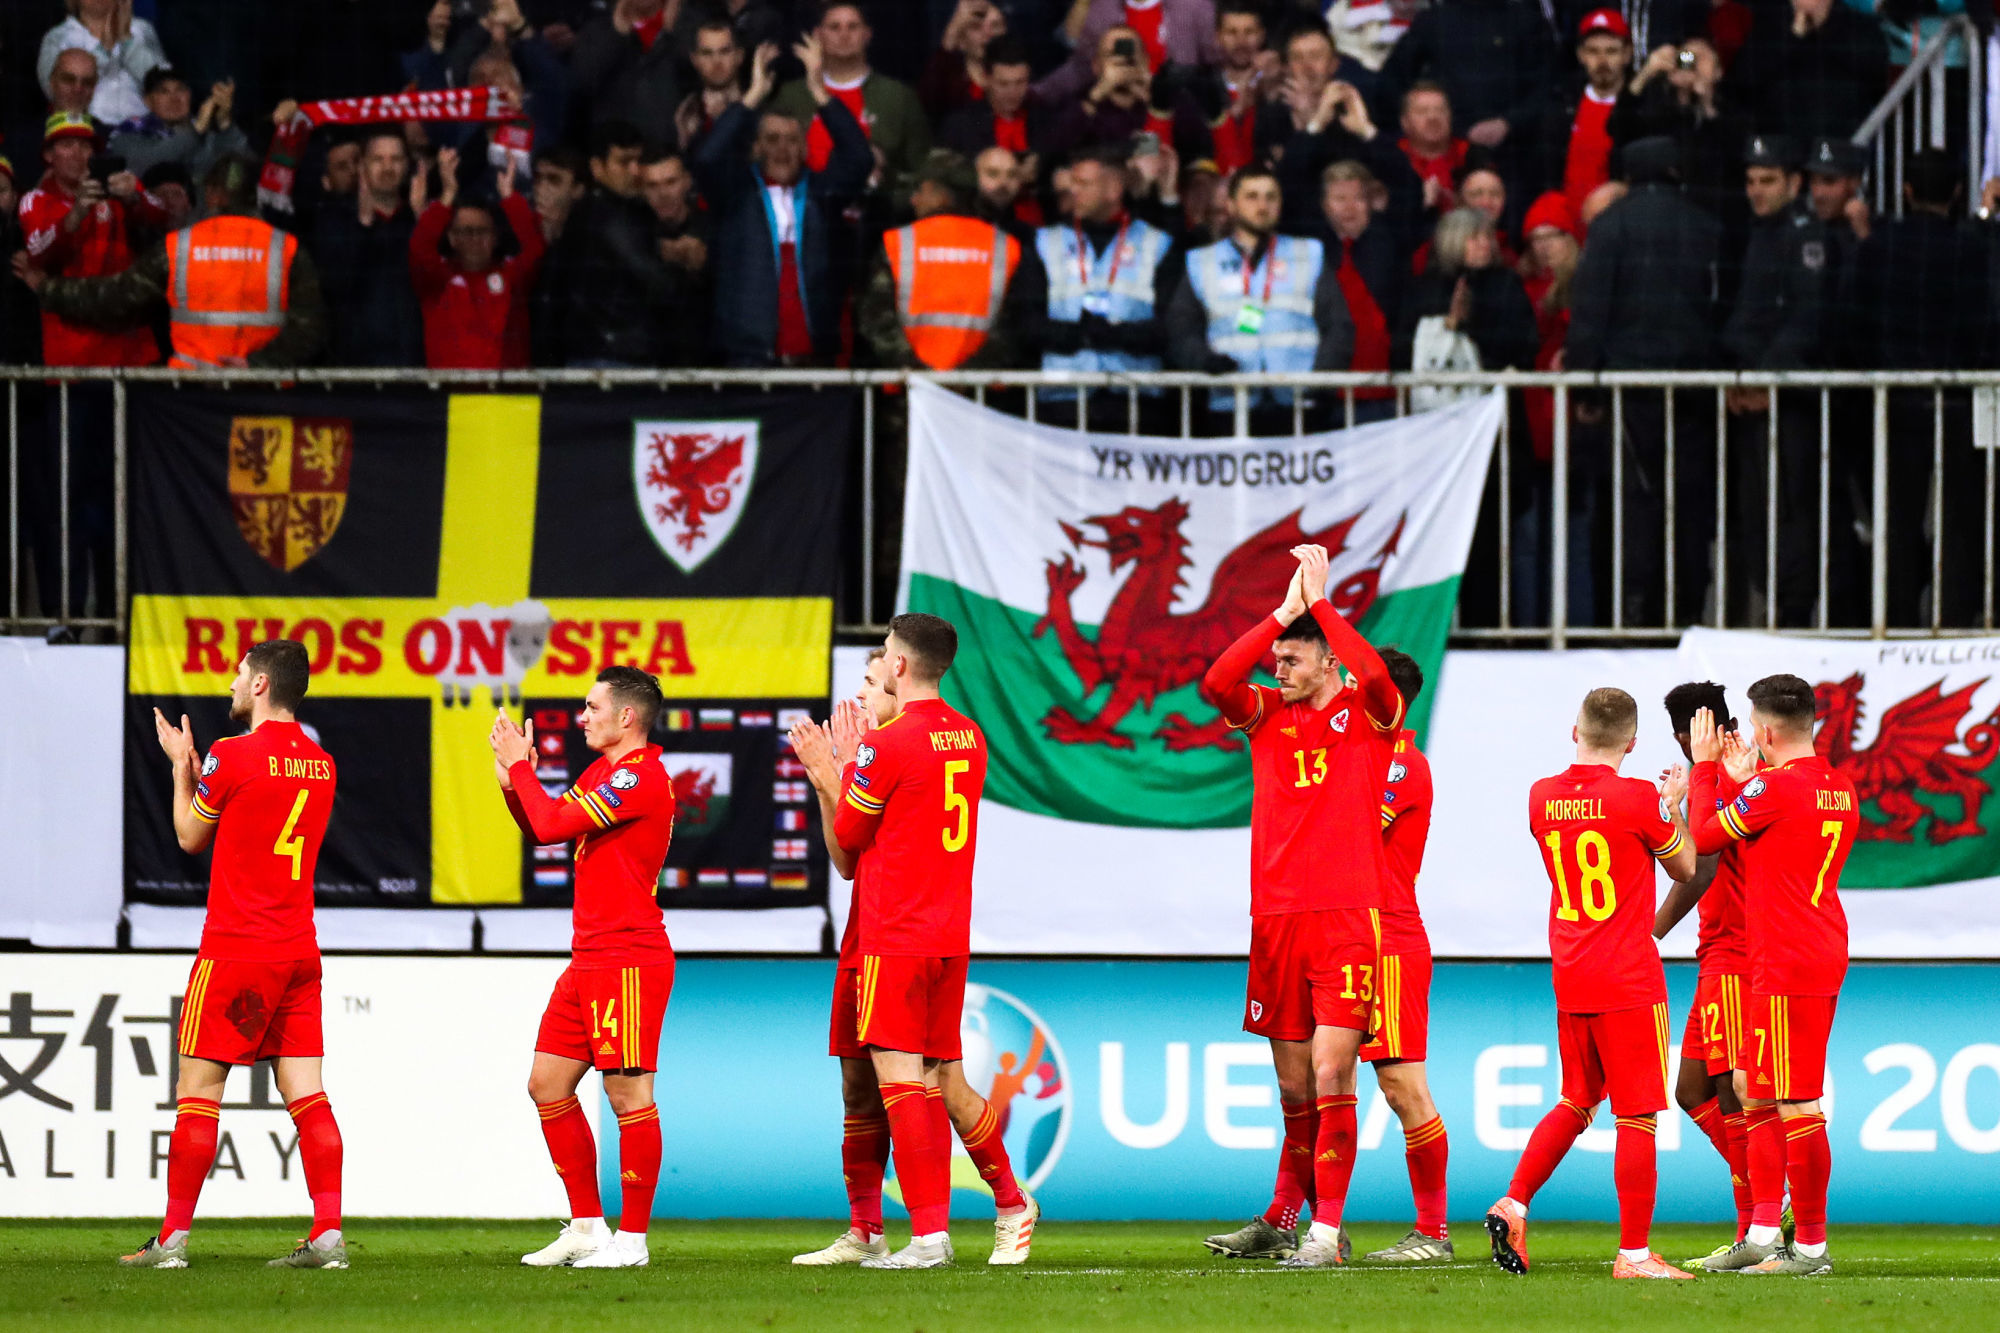 Wales players applaud the fans after the final whistle during the UEFA Euro 2020 Qualifying match at the Bakcell Arena, Baku. 
Photo by Icon Sport - Bakcell Arena - Baku (Azerbaidjan)